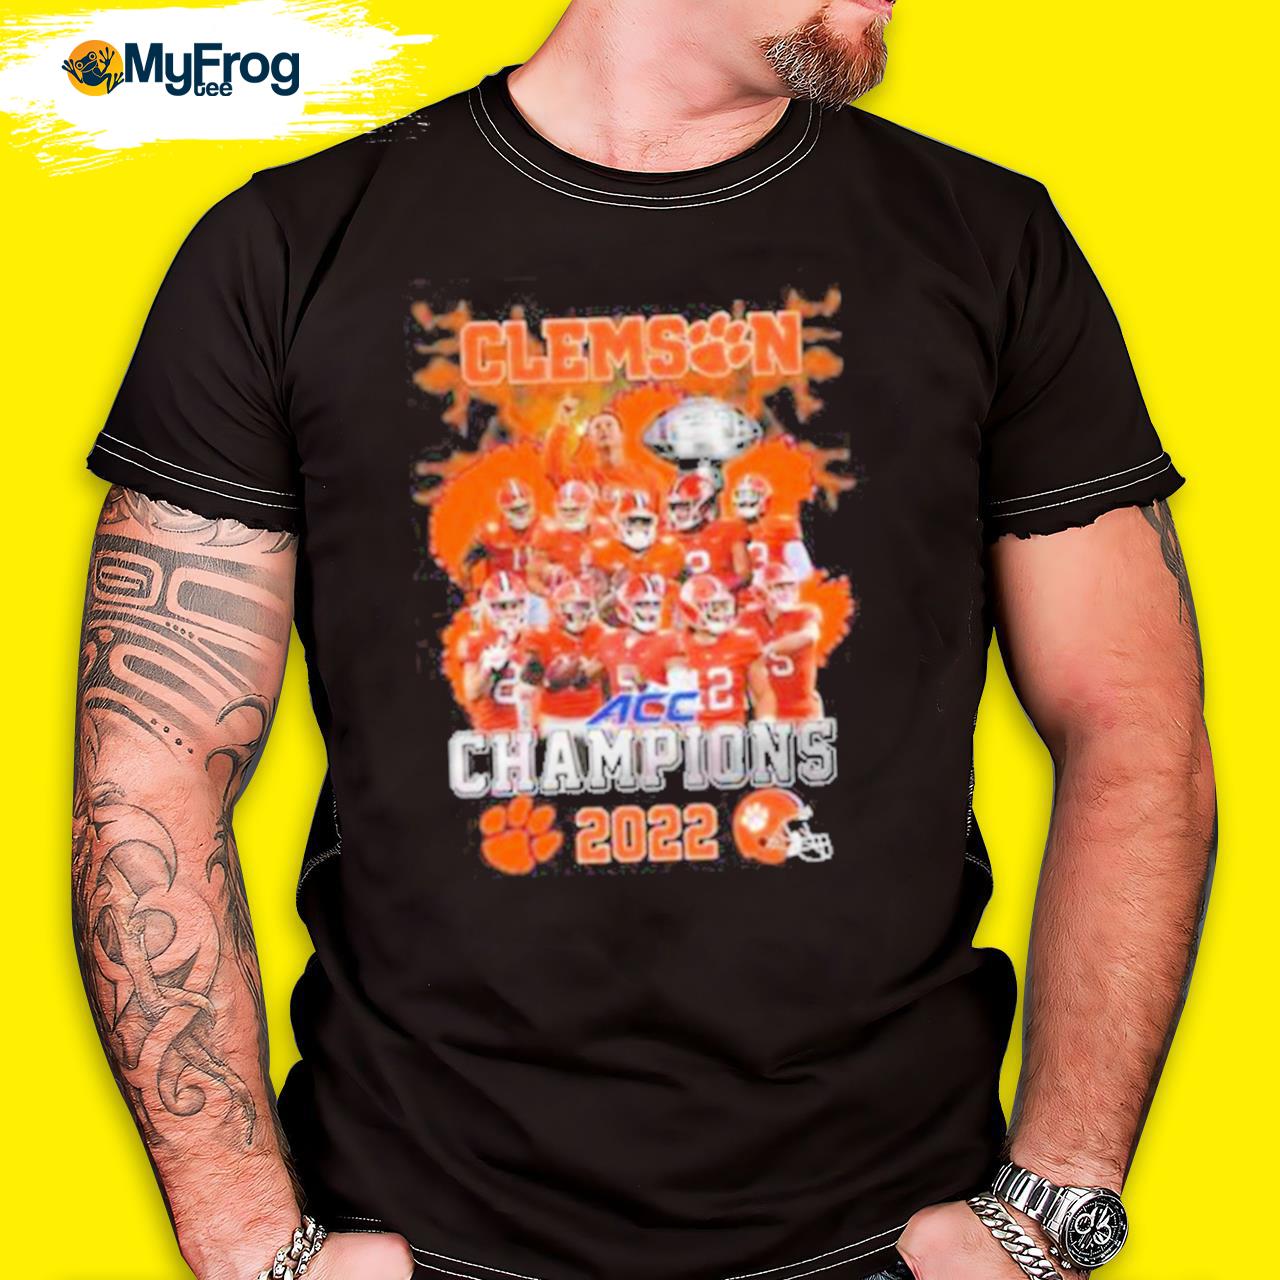 Clemson Tigers Acc Football Conference Champions 2022 shirt